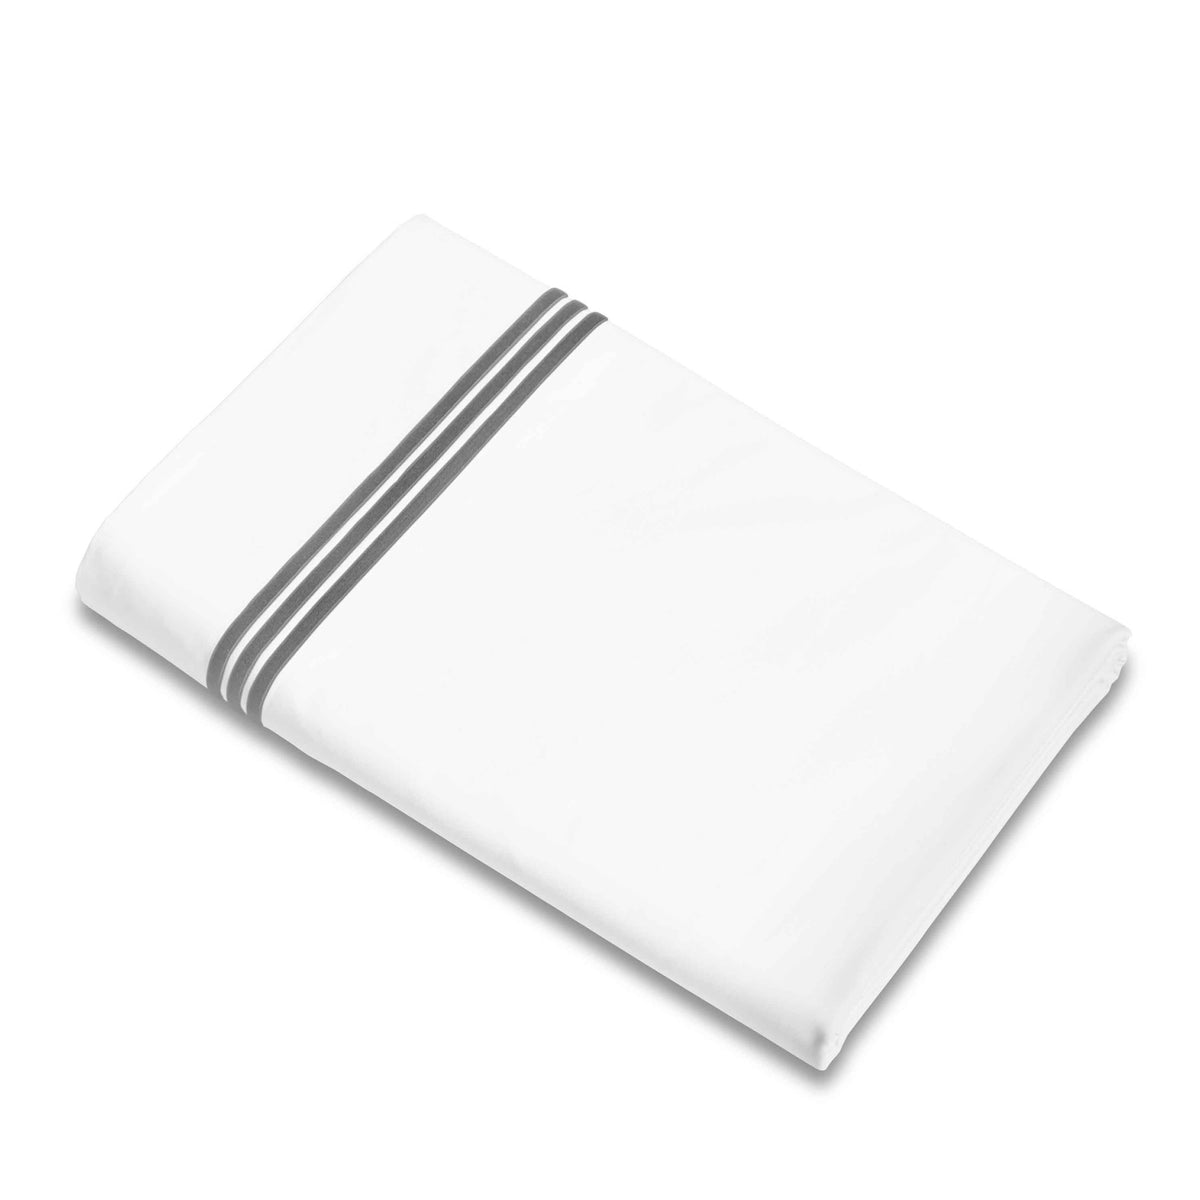 Flat Sheet of Signoria Platinum Percale Bedding in White/Lead Grey Color